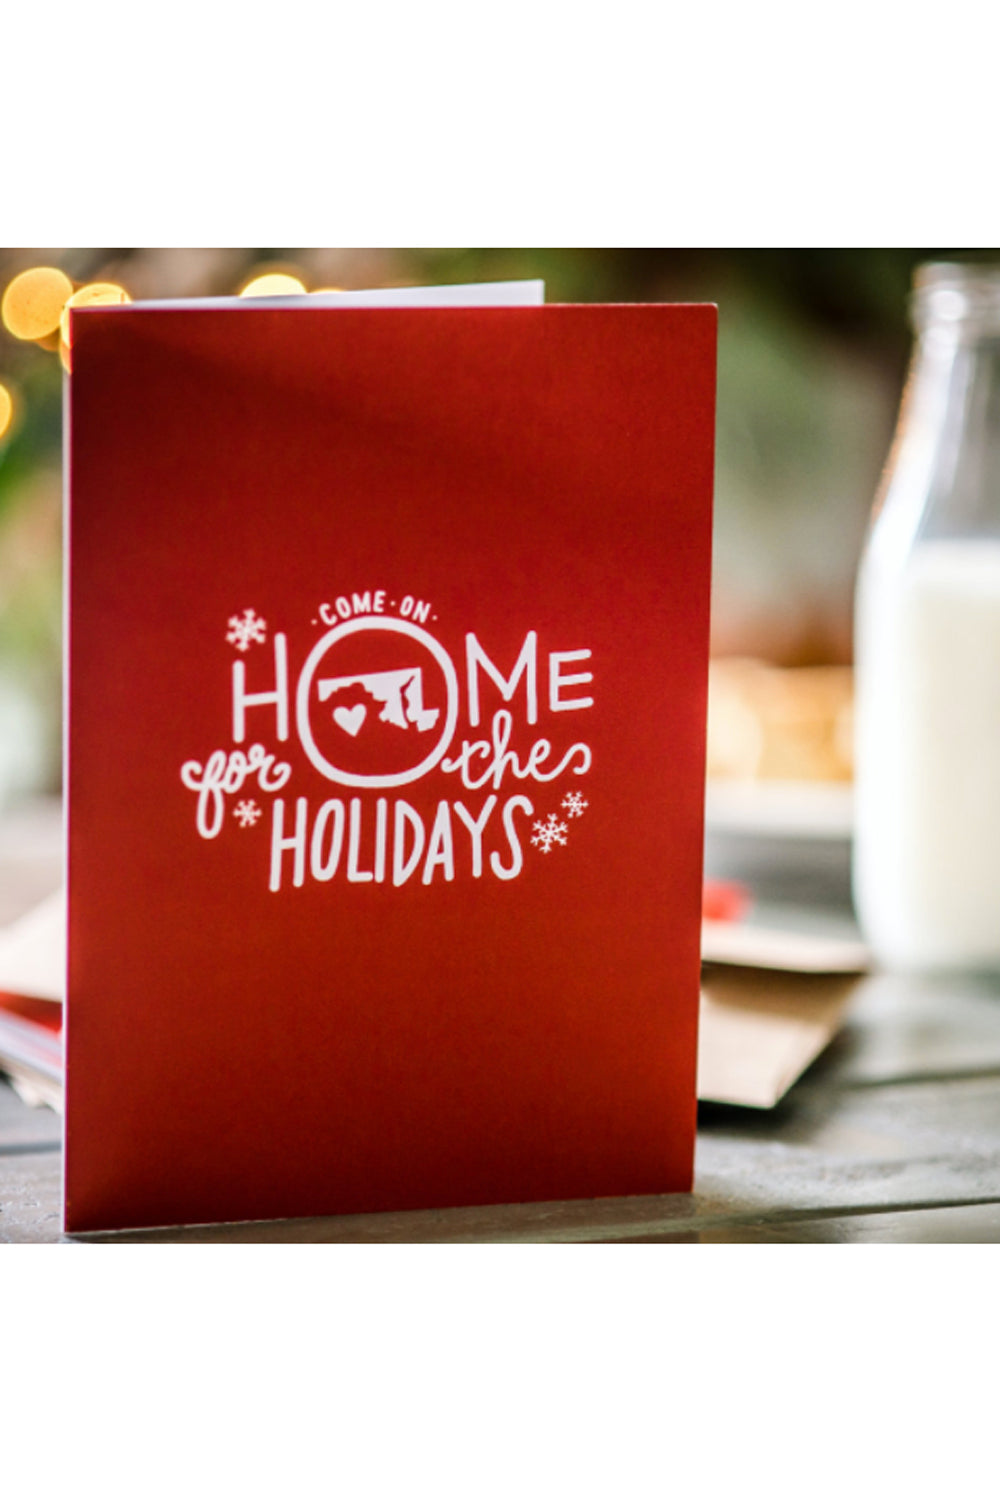 Locally Designed Holiday Card - Come on Home for the Holidays